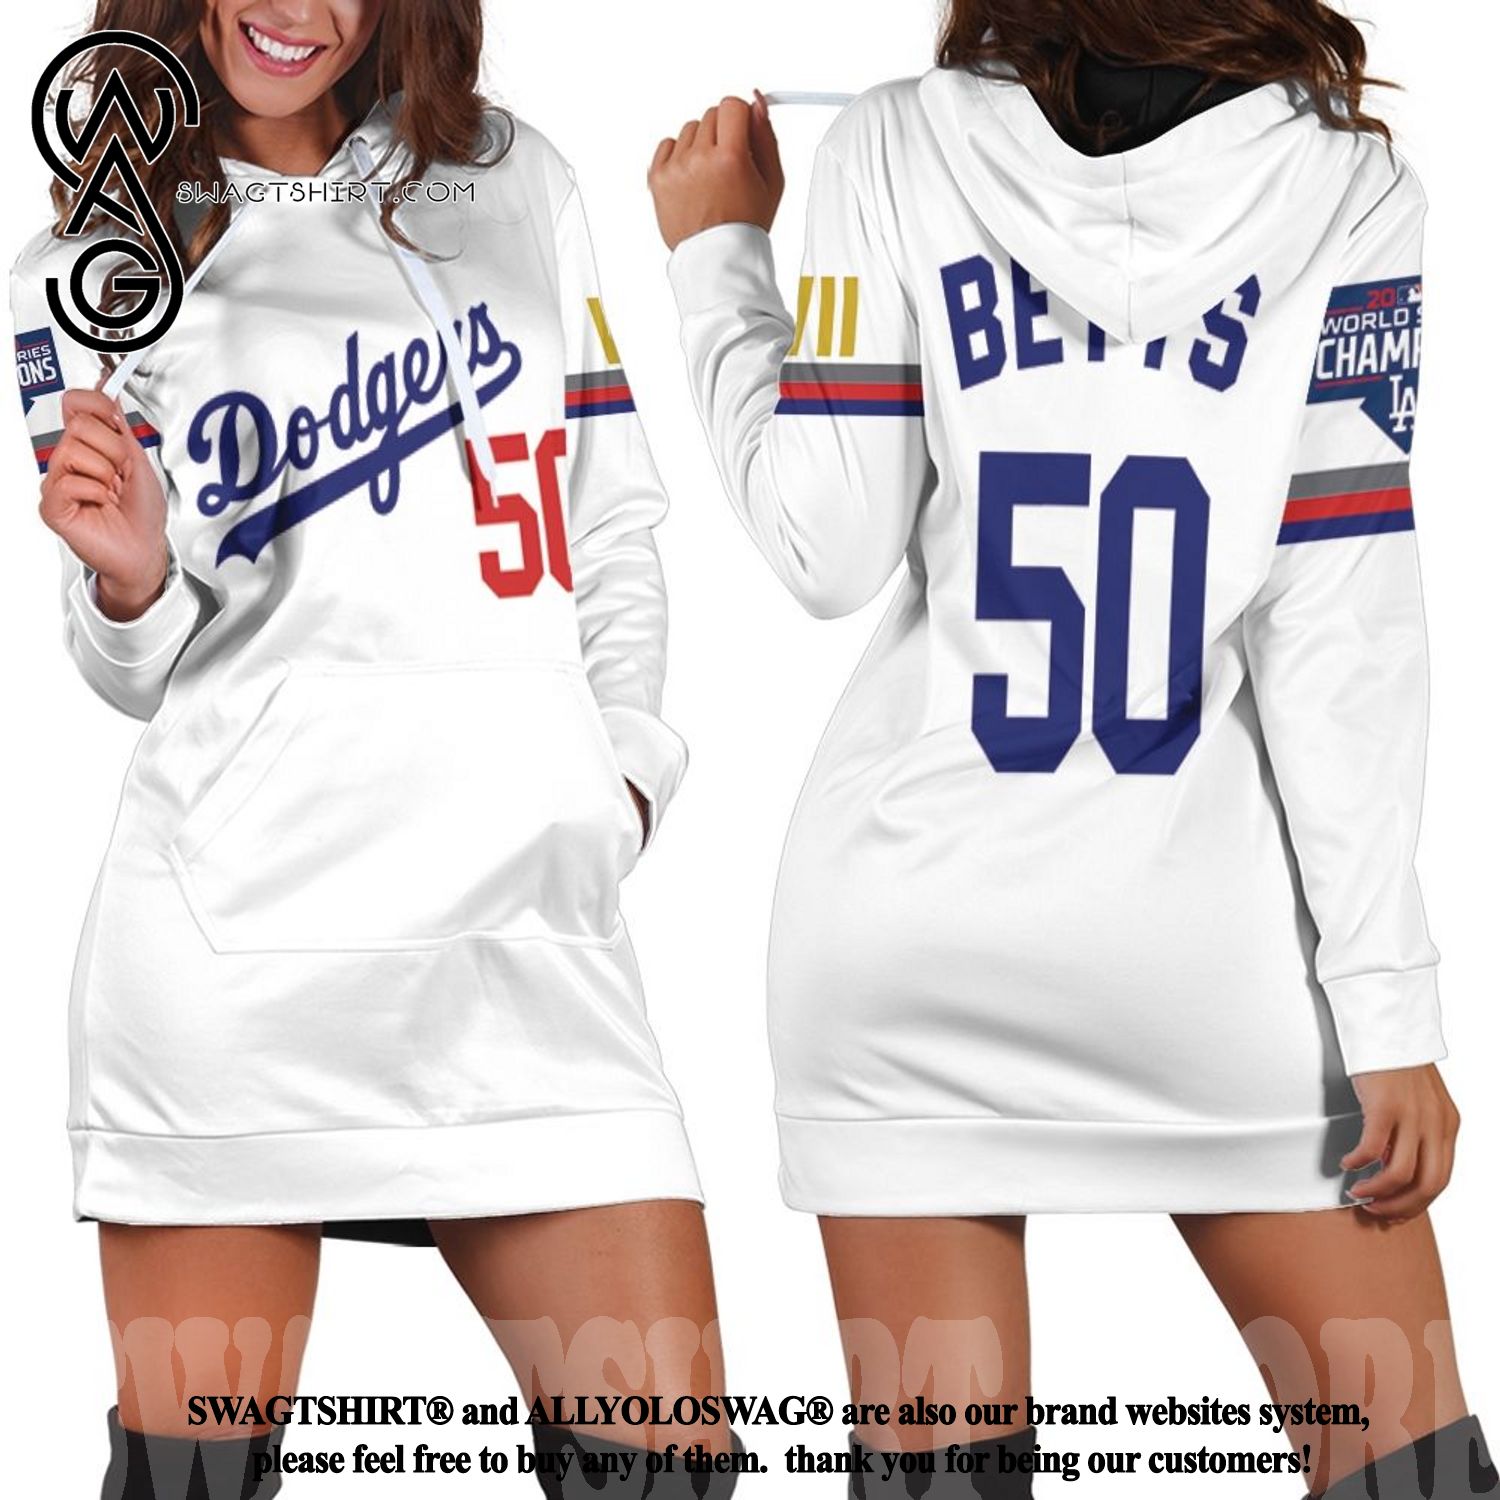 Best Selling Product] Los Angeles Dodgers Betts 50 Championship